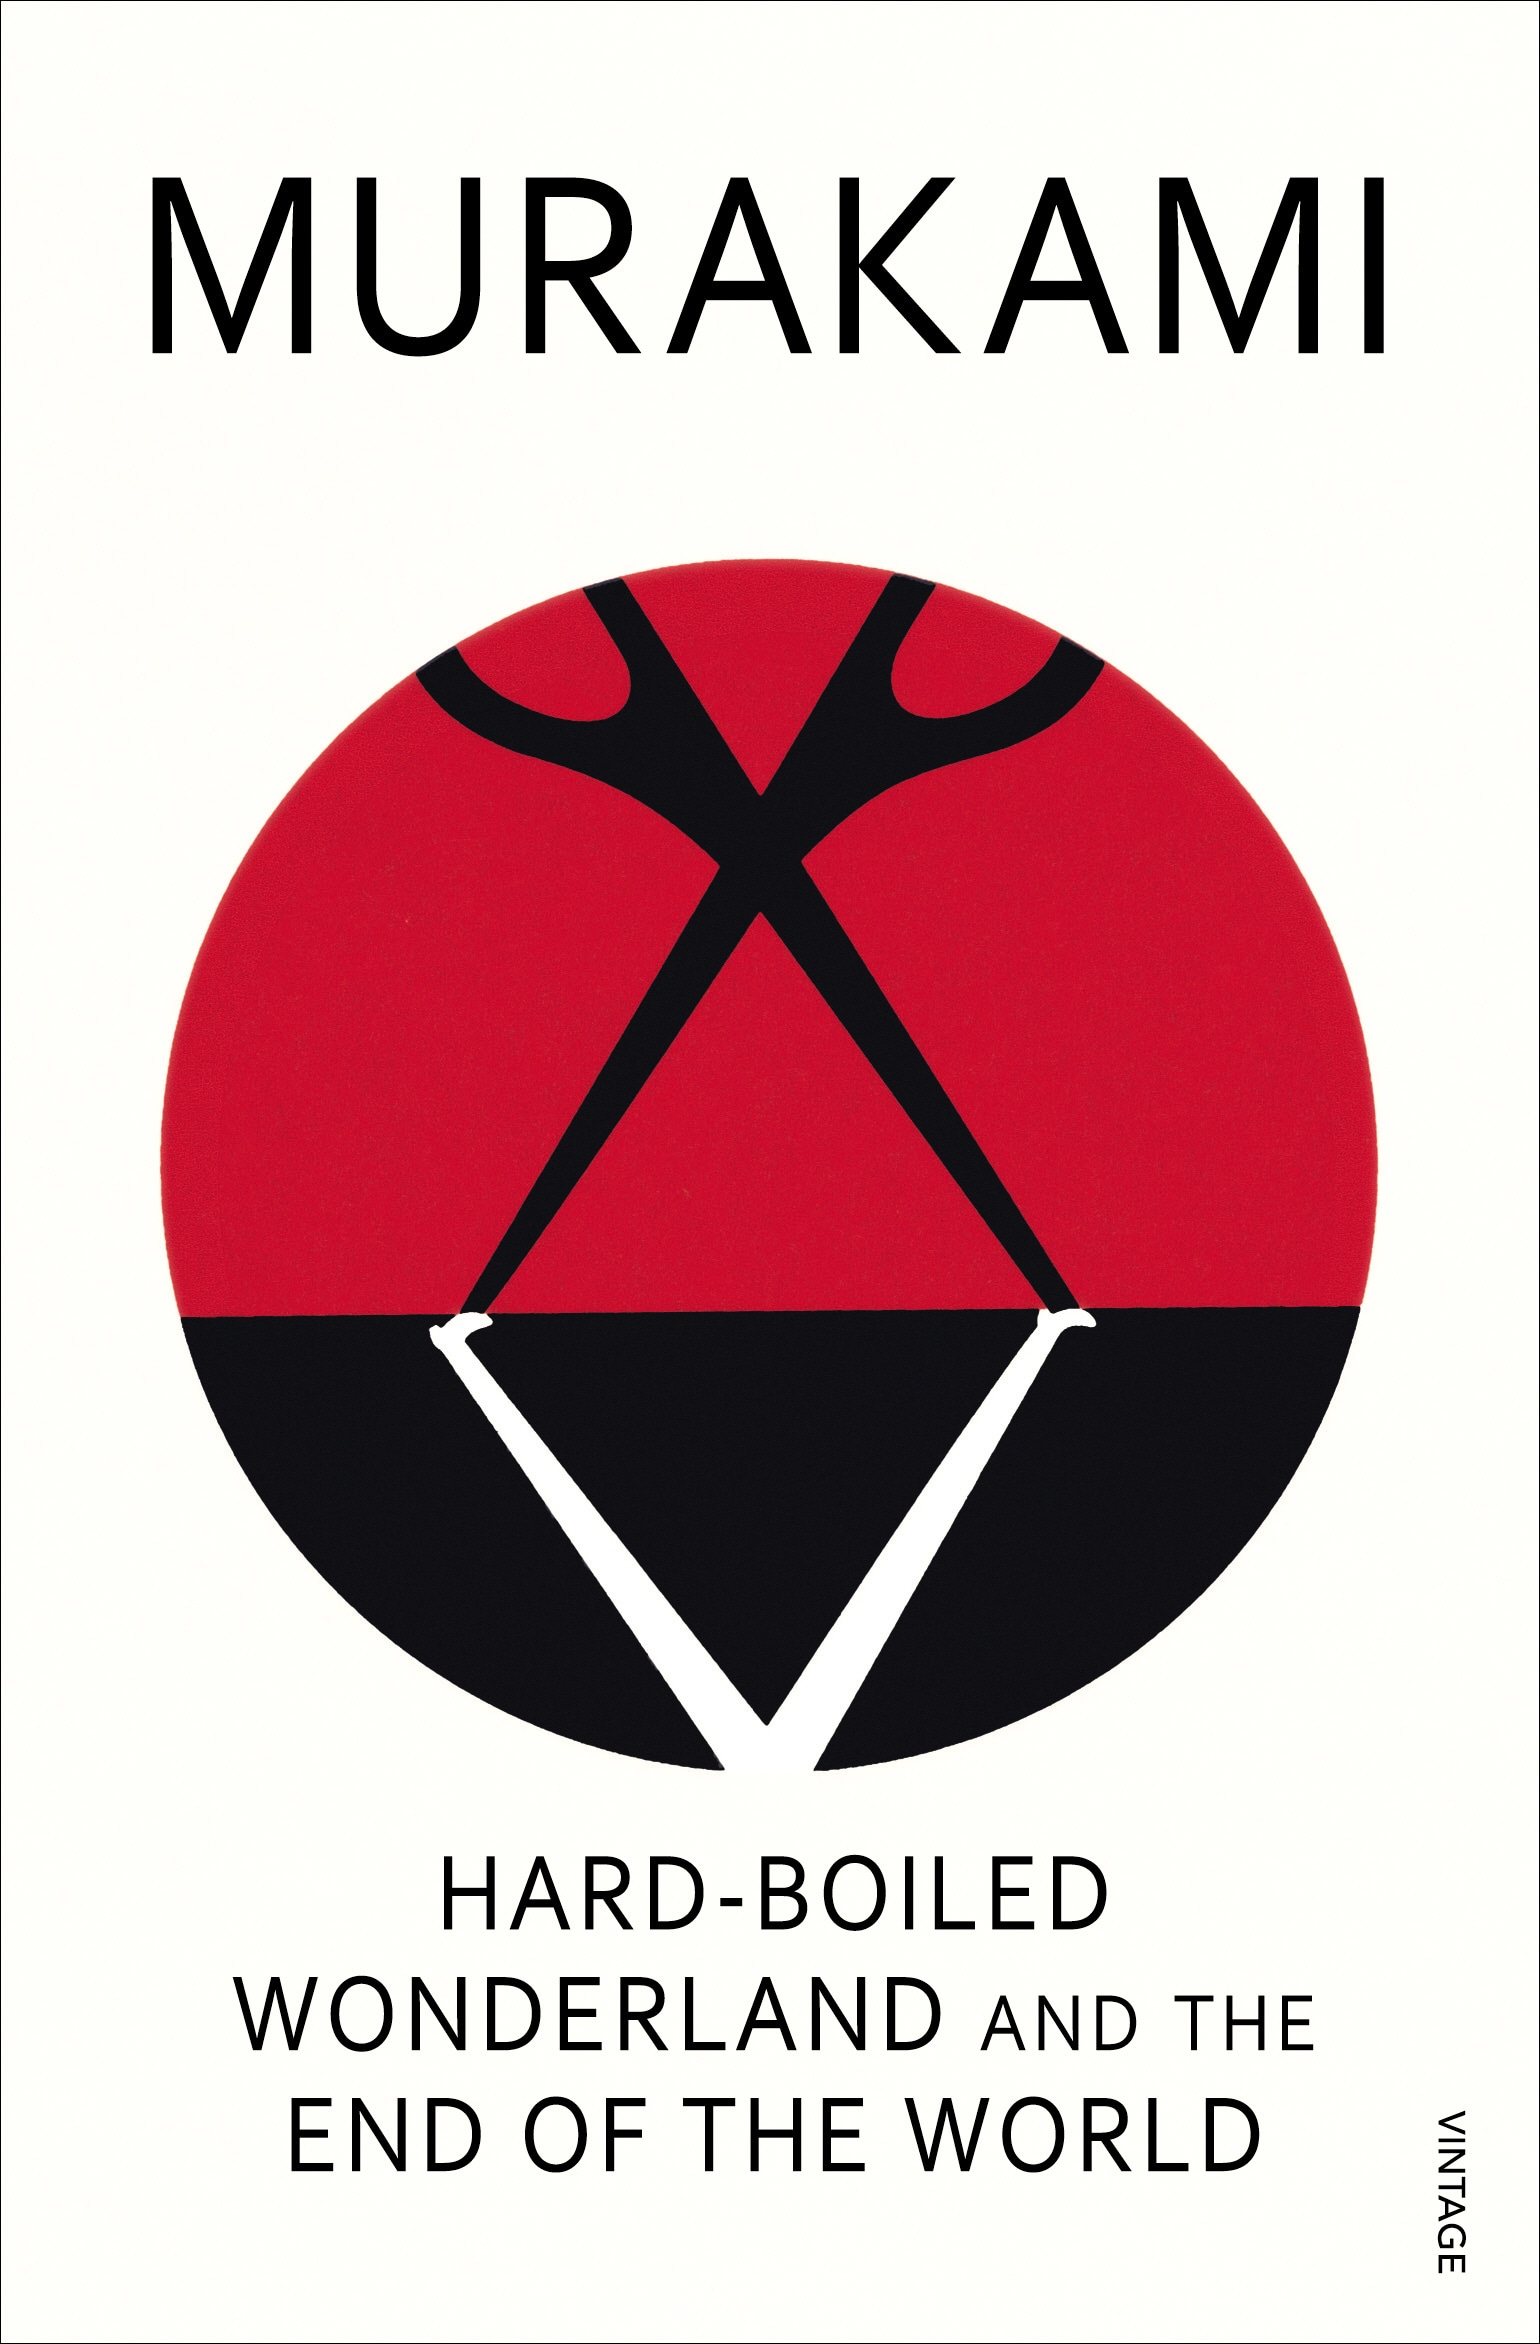 Book “Hard-Boiled Wonderland and the End of the World” by Haruki Murakami — September 28, 2001